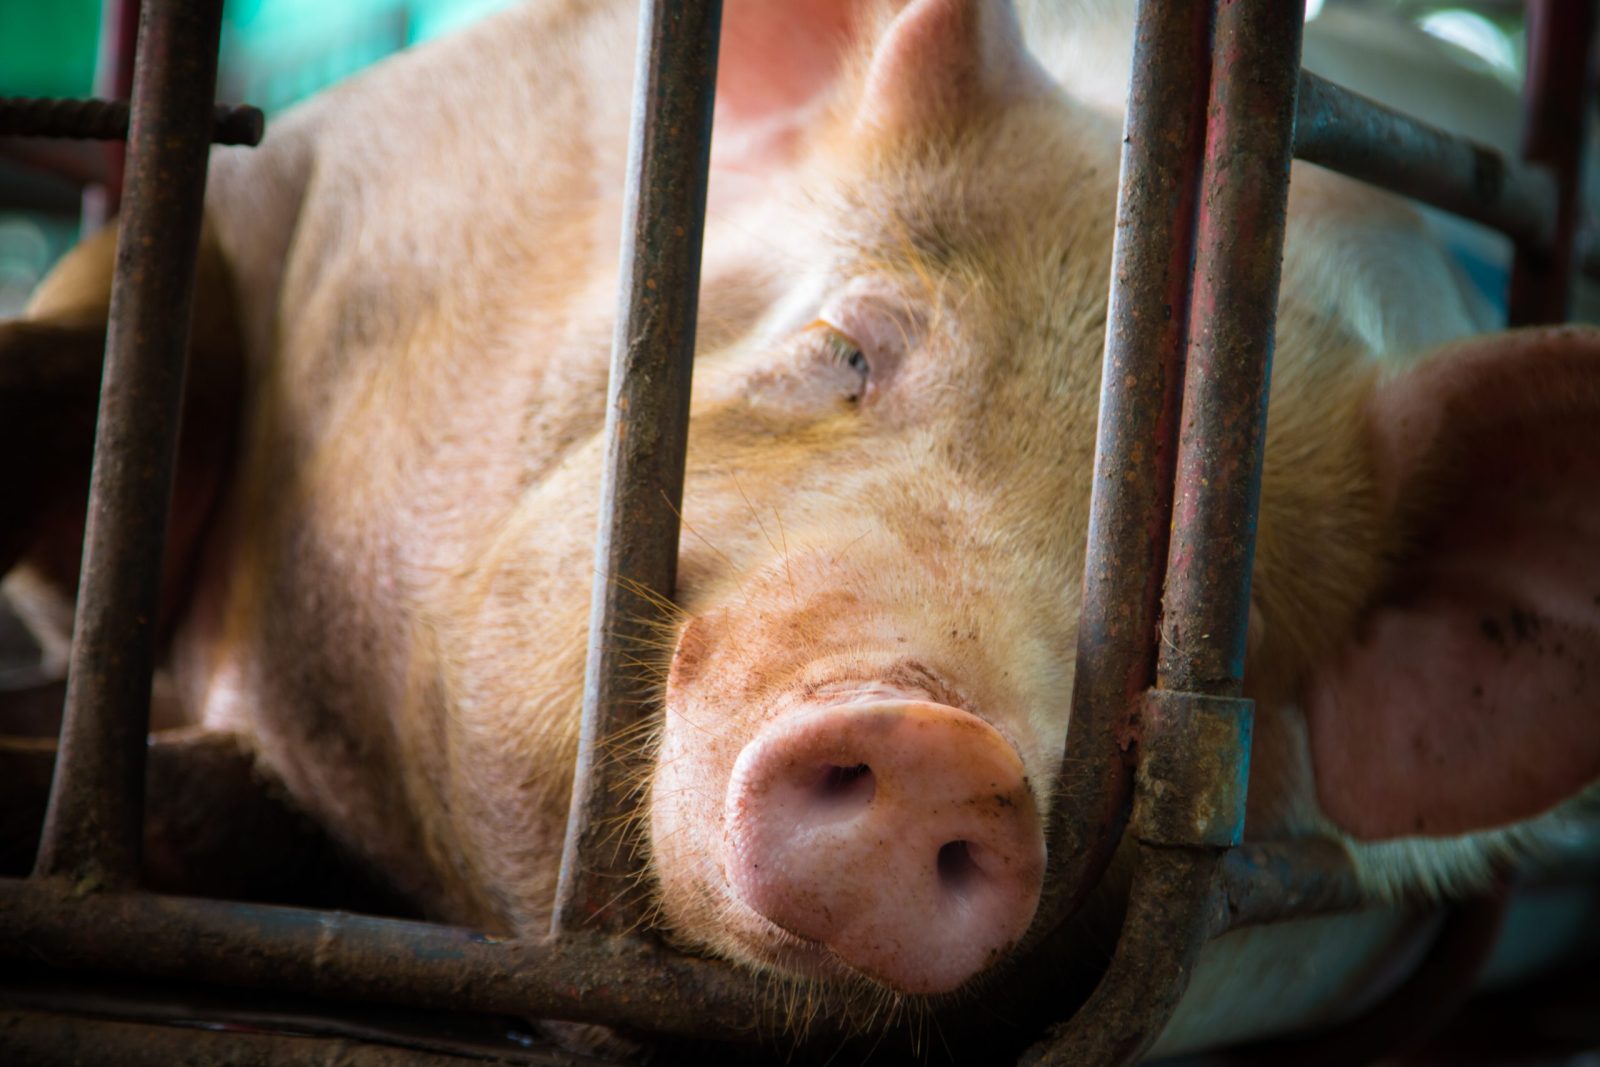 shutterstock_667529797-scaled-e1670375811911.jpgfit16002C1067ssl1 Petition: Tell the Chinese Government to Stop High-Rise Factory Farm From Slaughtering 1.2 Million Pigs Each Year